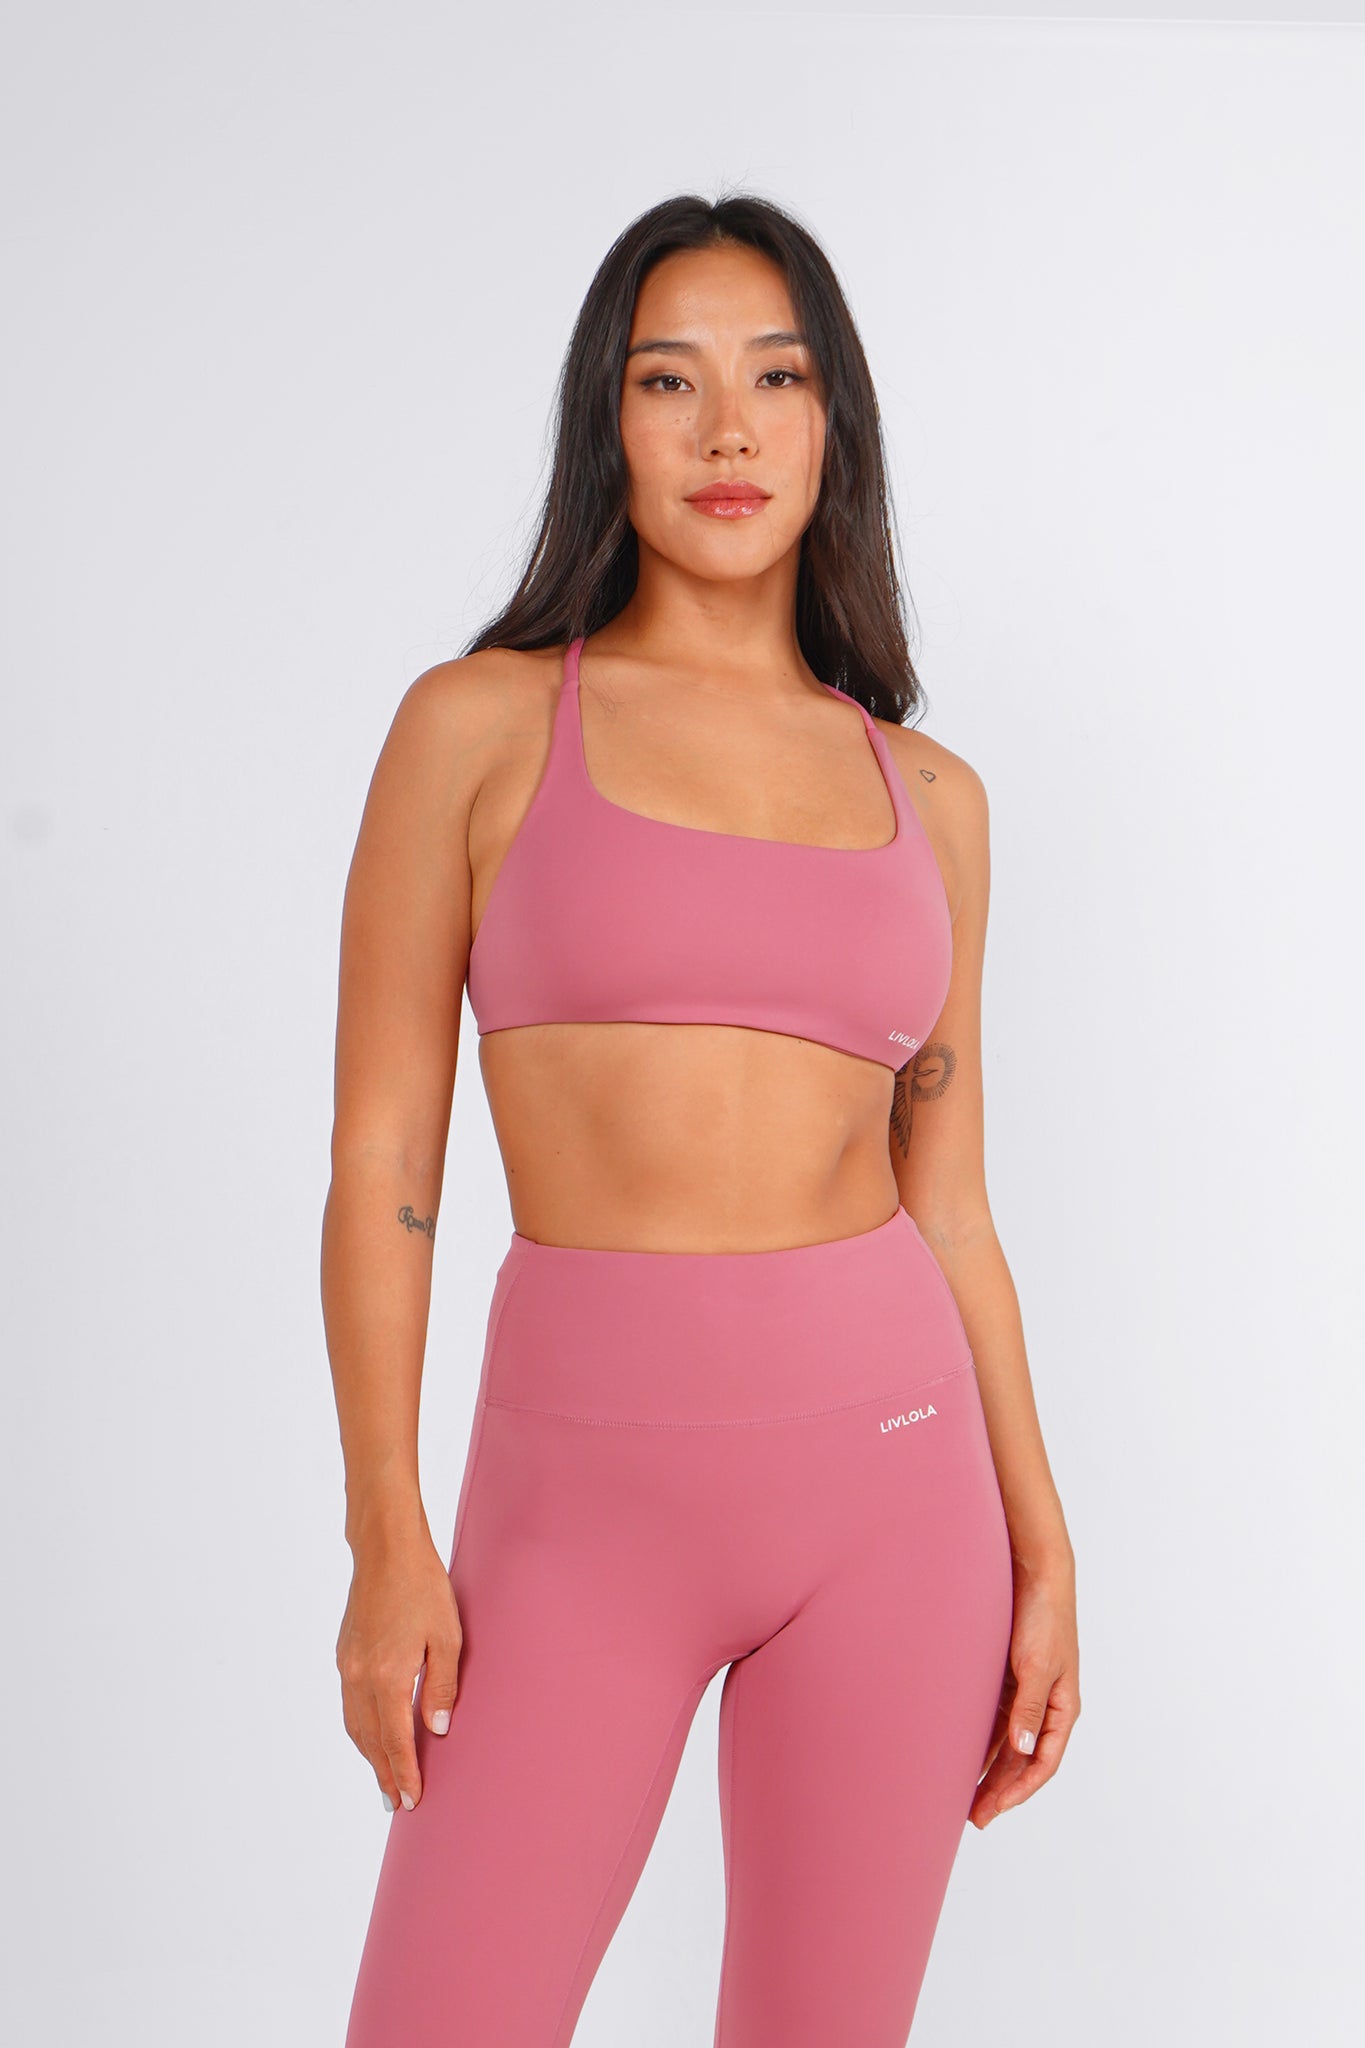 LIVLOLA Activewear, Camel toe? No thank you 🙅🏻‍♀️ Walk, flow and dance  with confidence and style with our leggings today 🥰